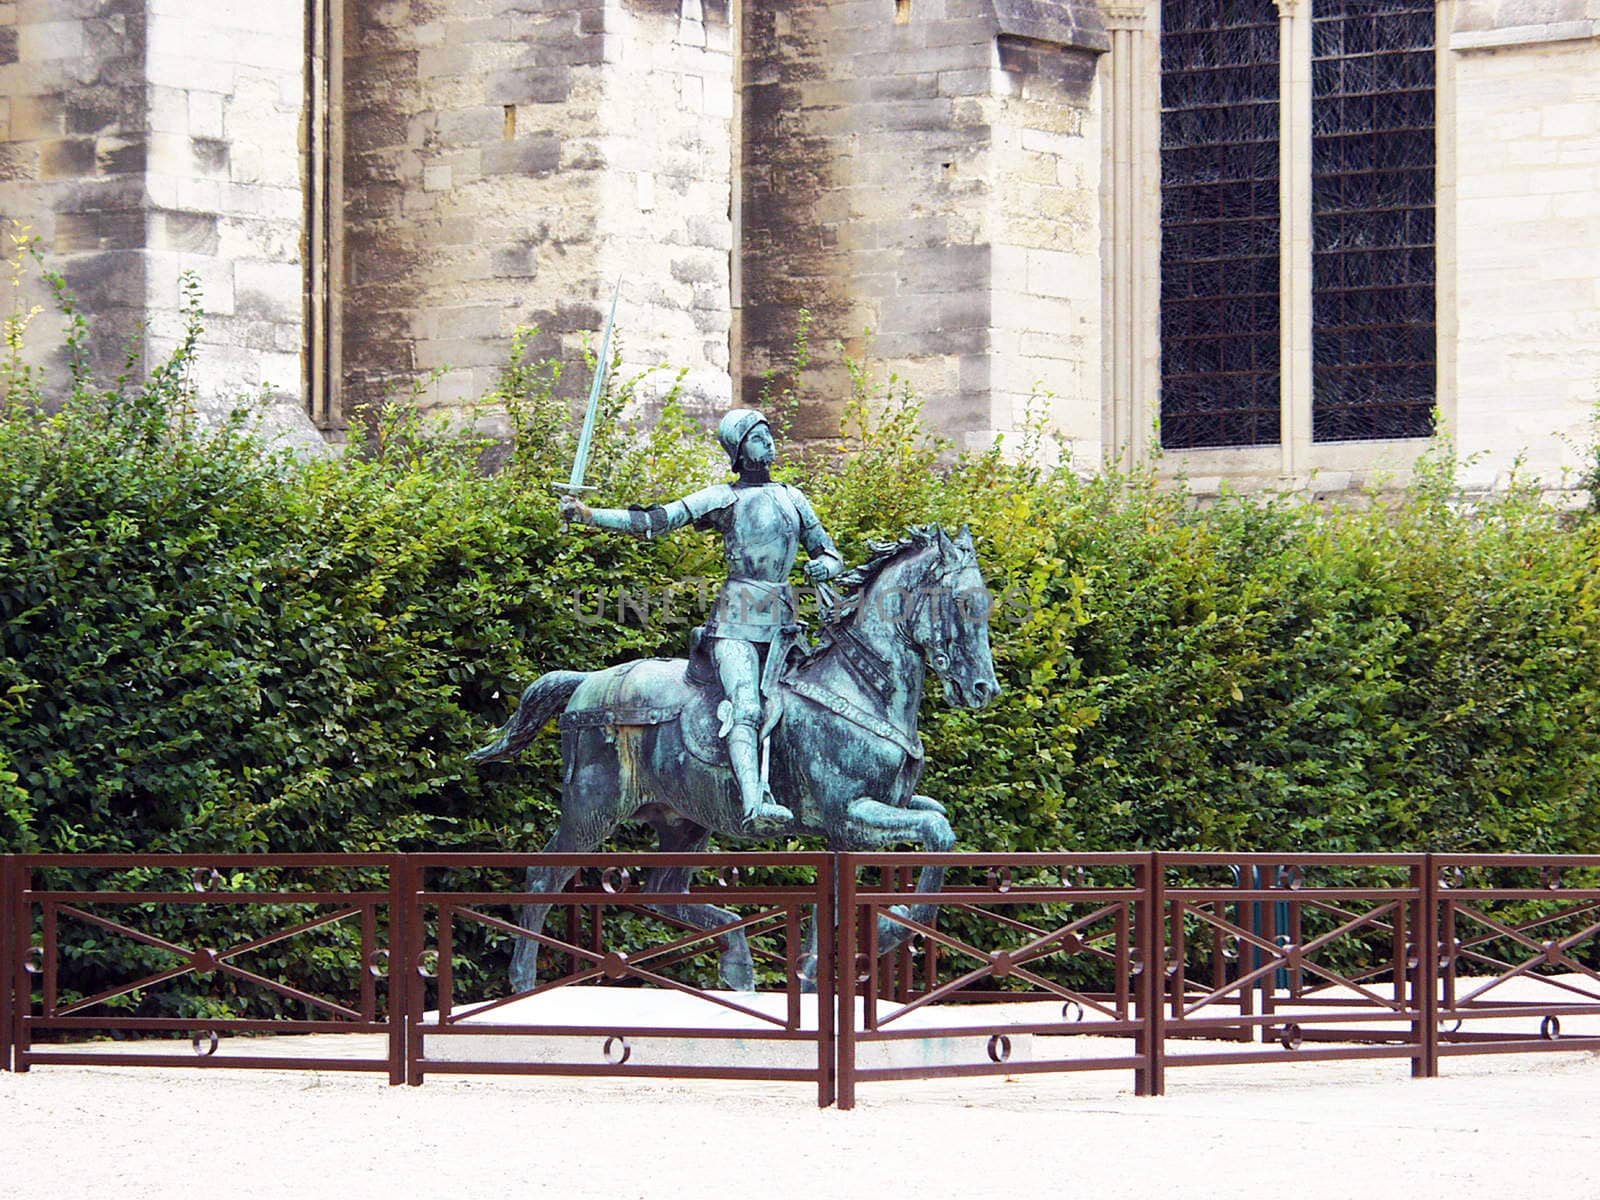 Statue of Saint Joan of Arc in Reims. France 